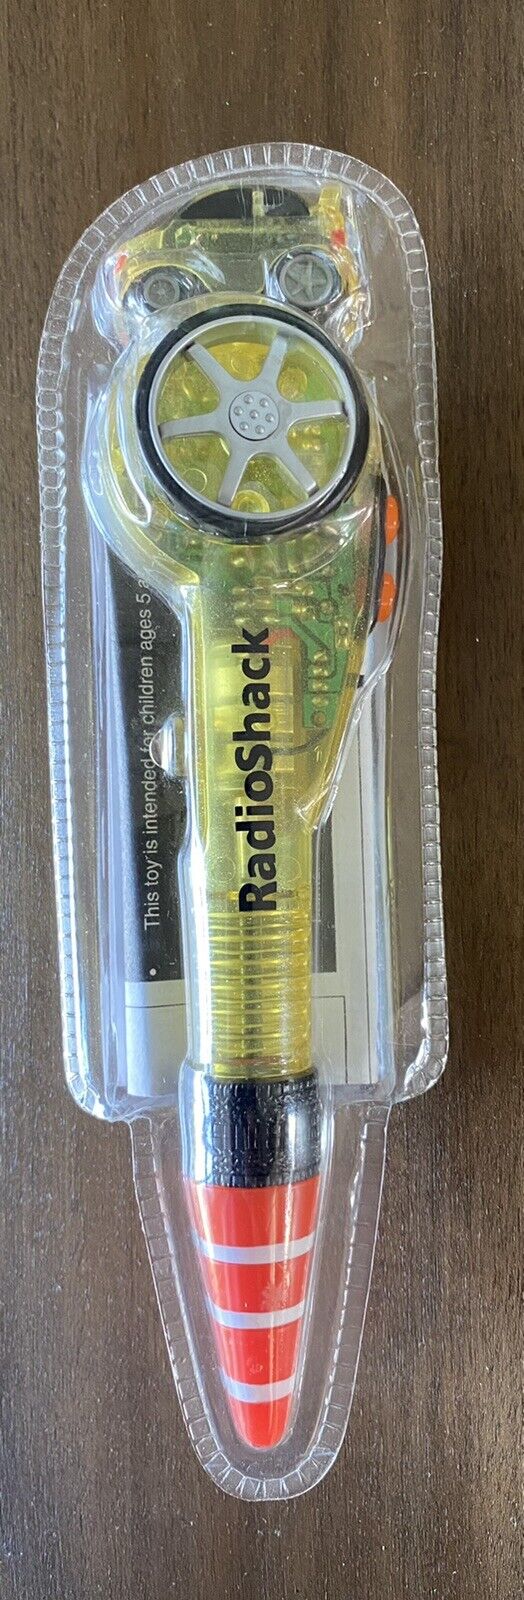 VINTAGE RADIO SHACK MICRO RACER REMOTE CONTROL CAR AND PEN NEW OLD STOCK